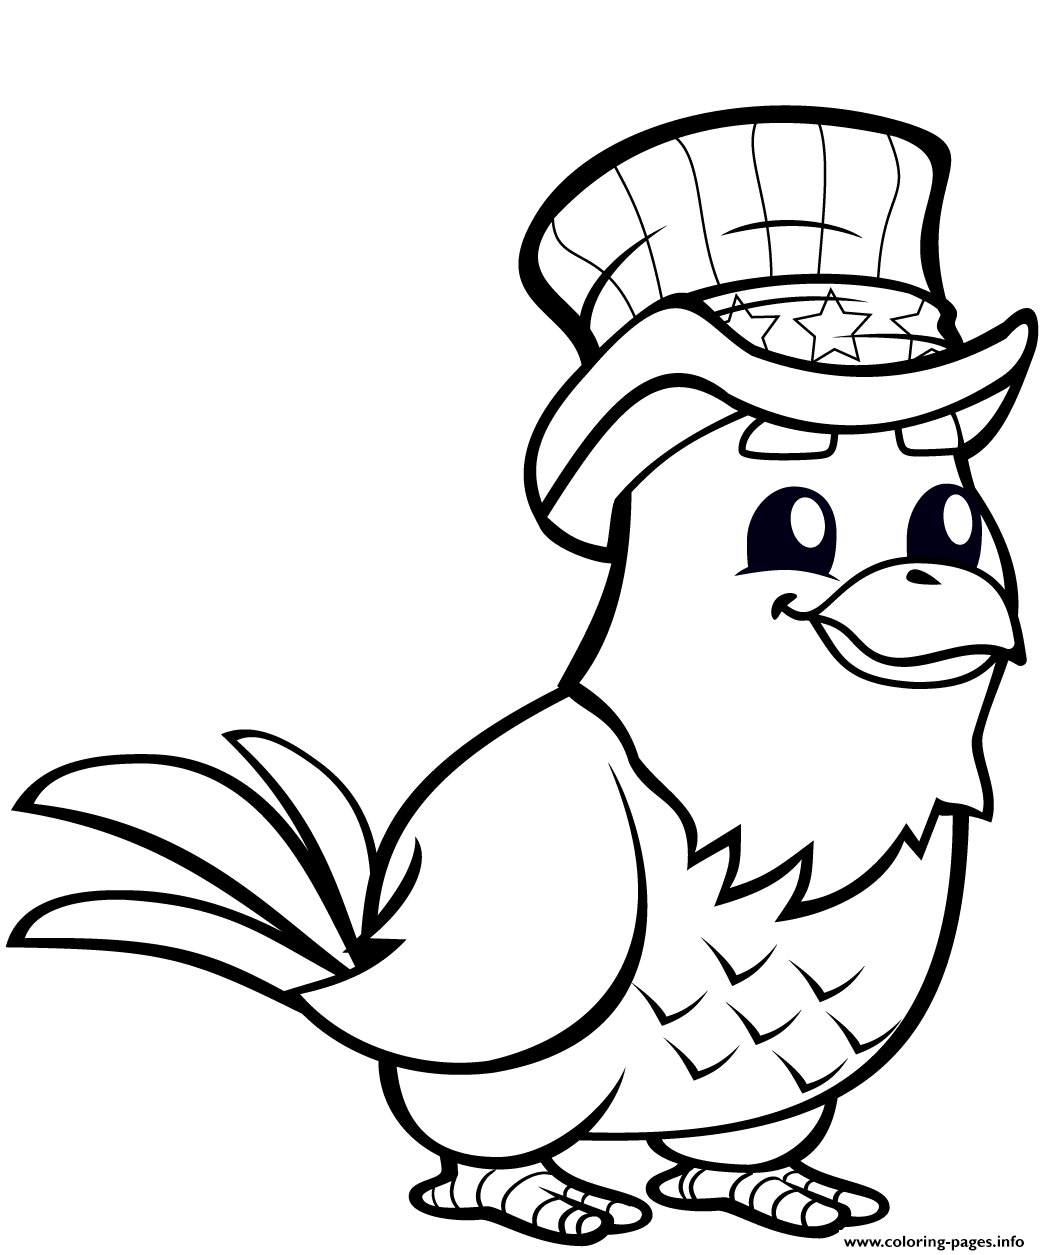 Funny Eagle With Top Hat coloring